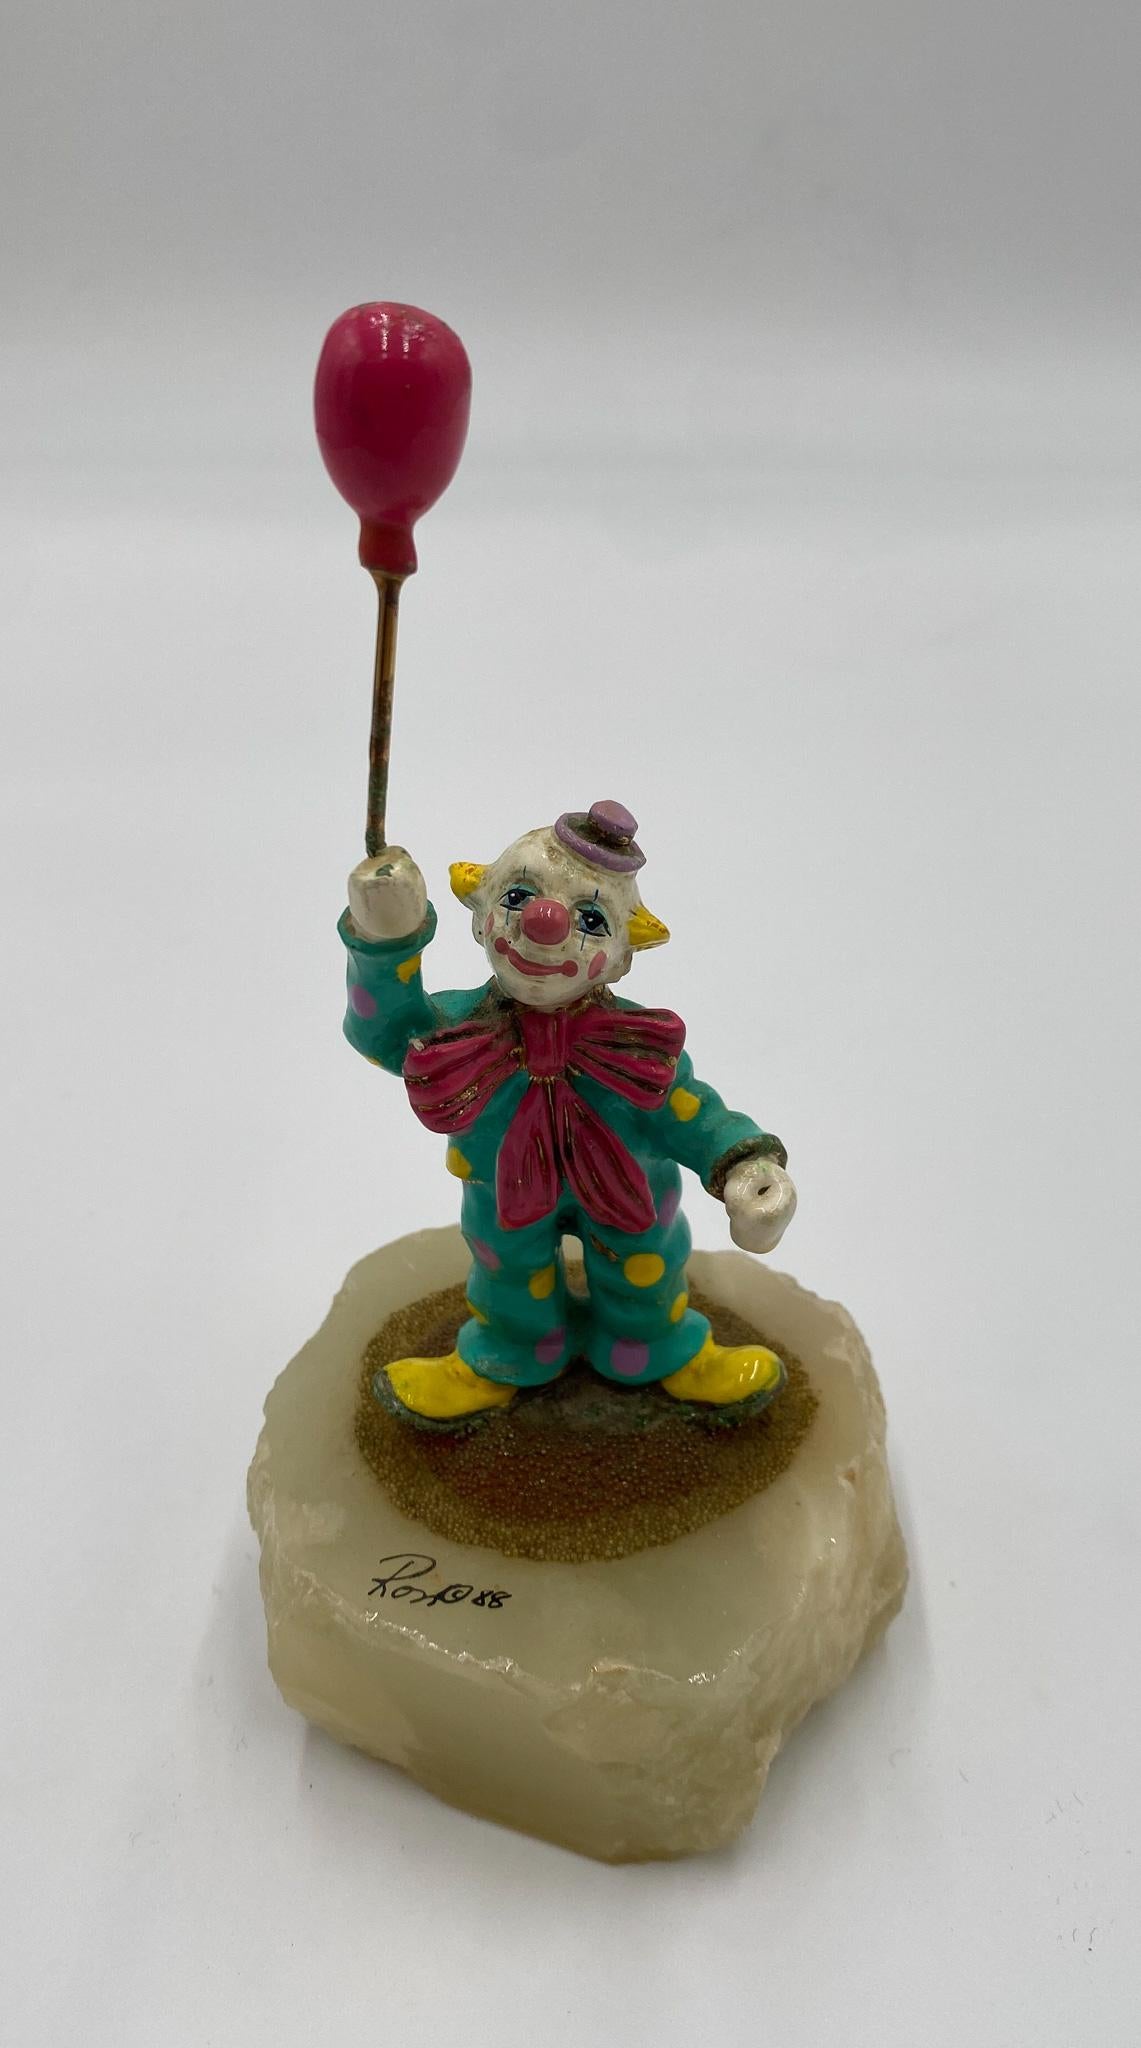 Ron Lee Whimsical Bronze Clown Sculpture, USA, 1988 For Sale 1